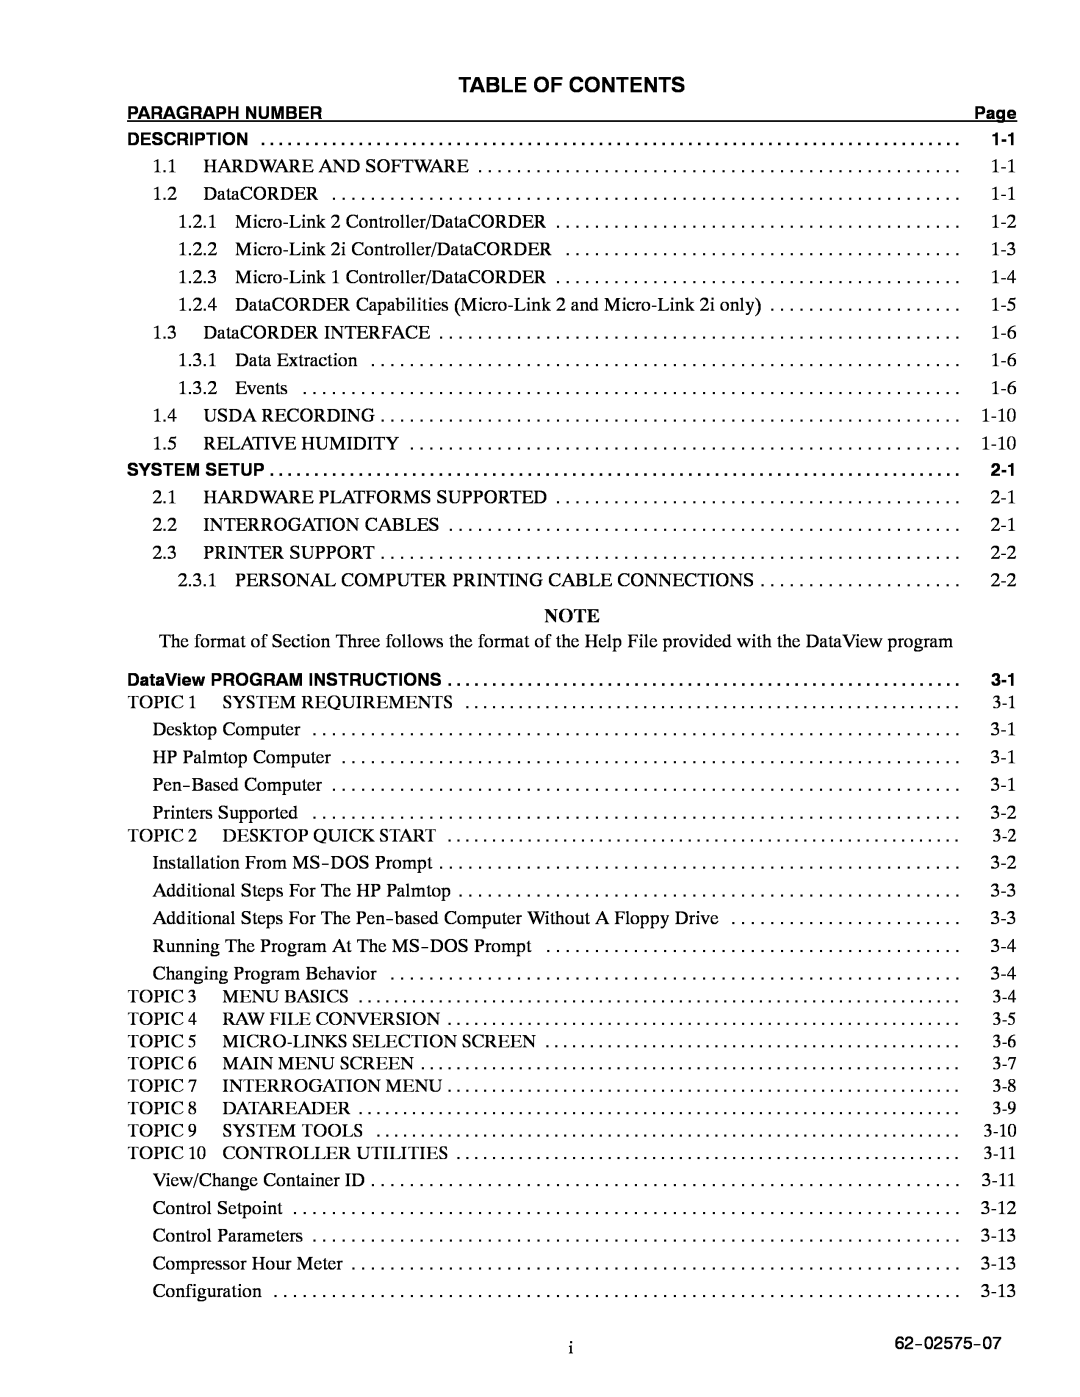 Carrier Container Refrigeration Unit manual Table Of Contents, Hardware And Software, Micro-Link 2i Controller/DataCORDER 